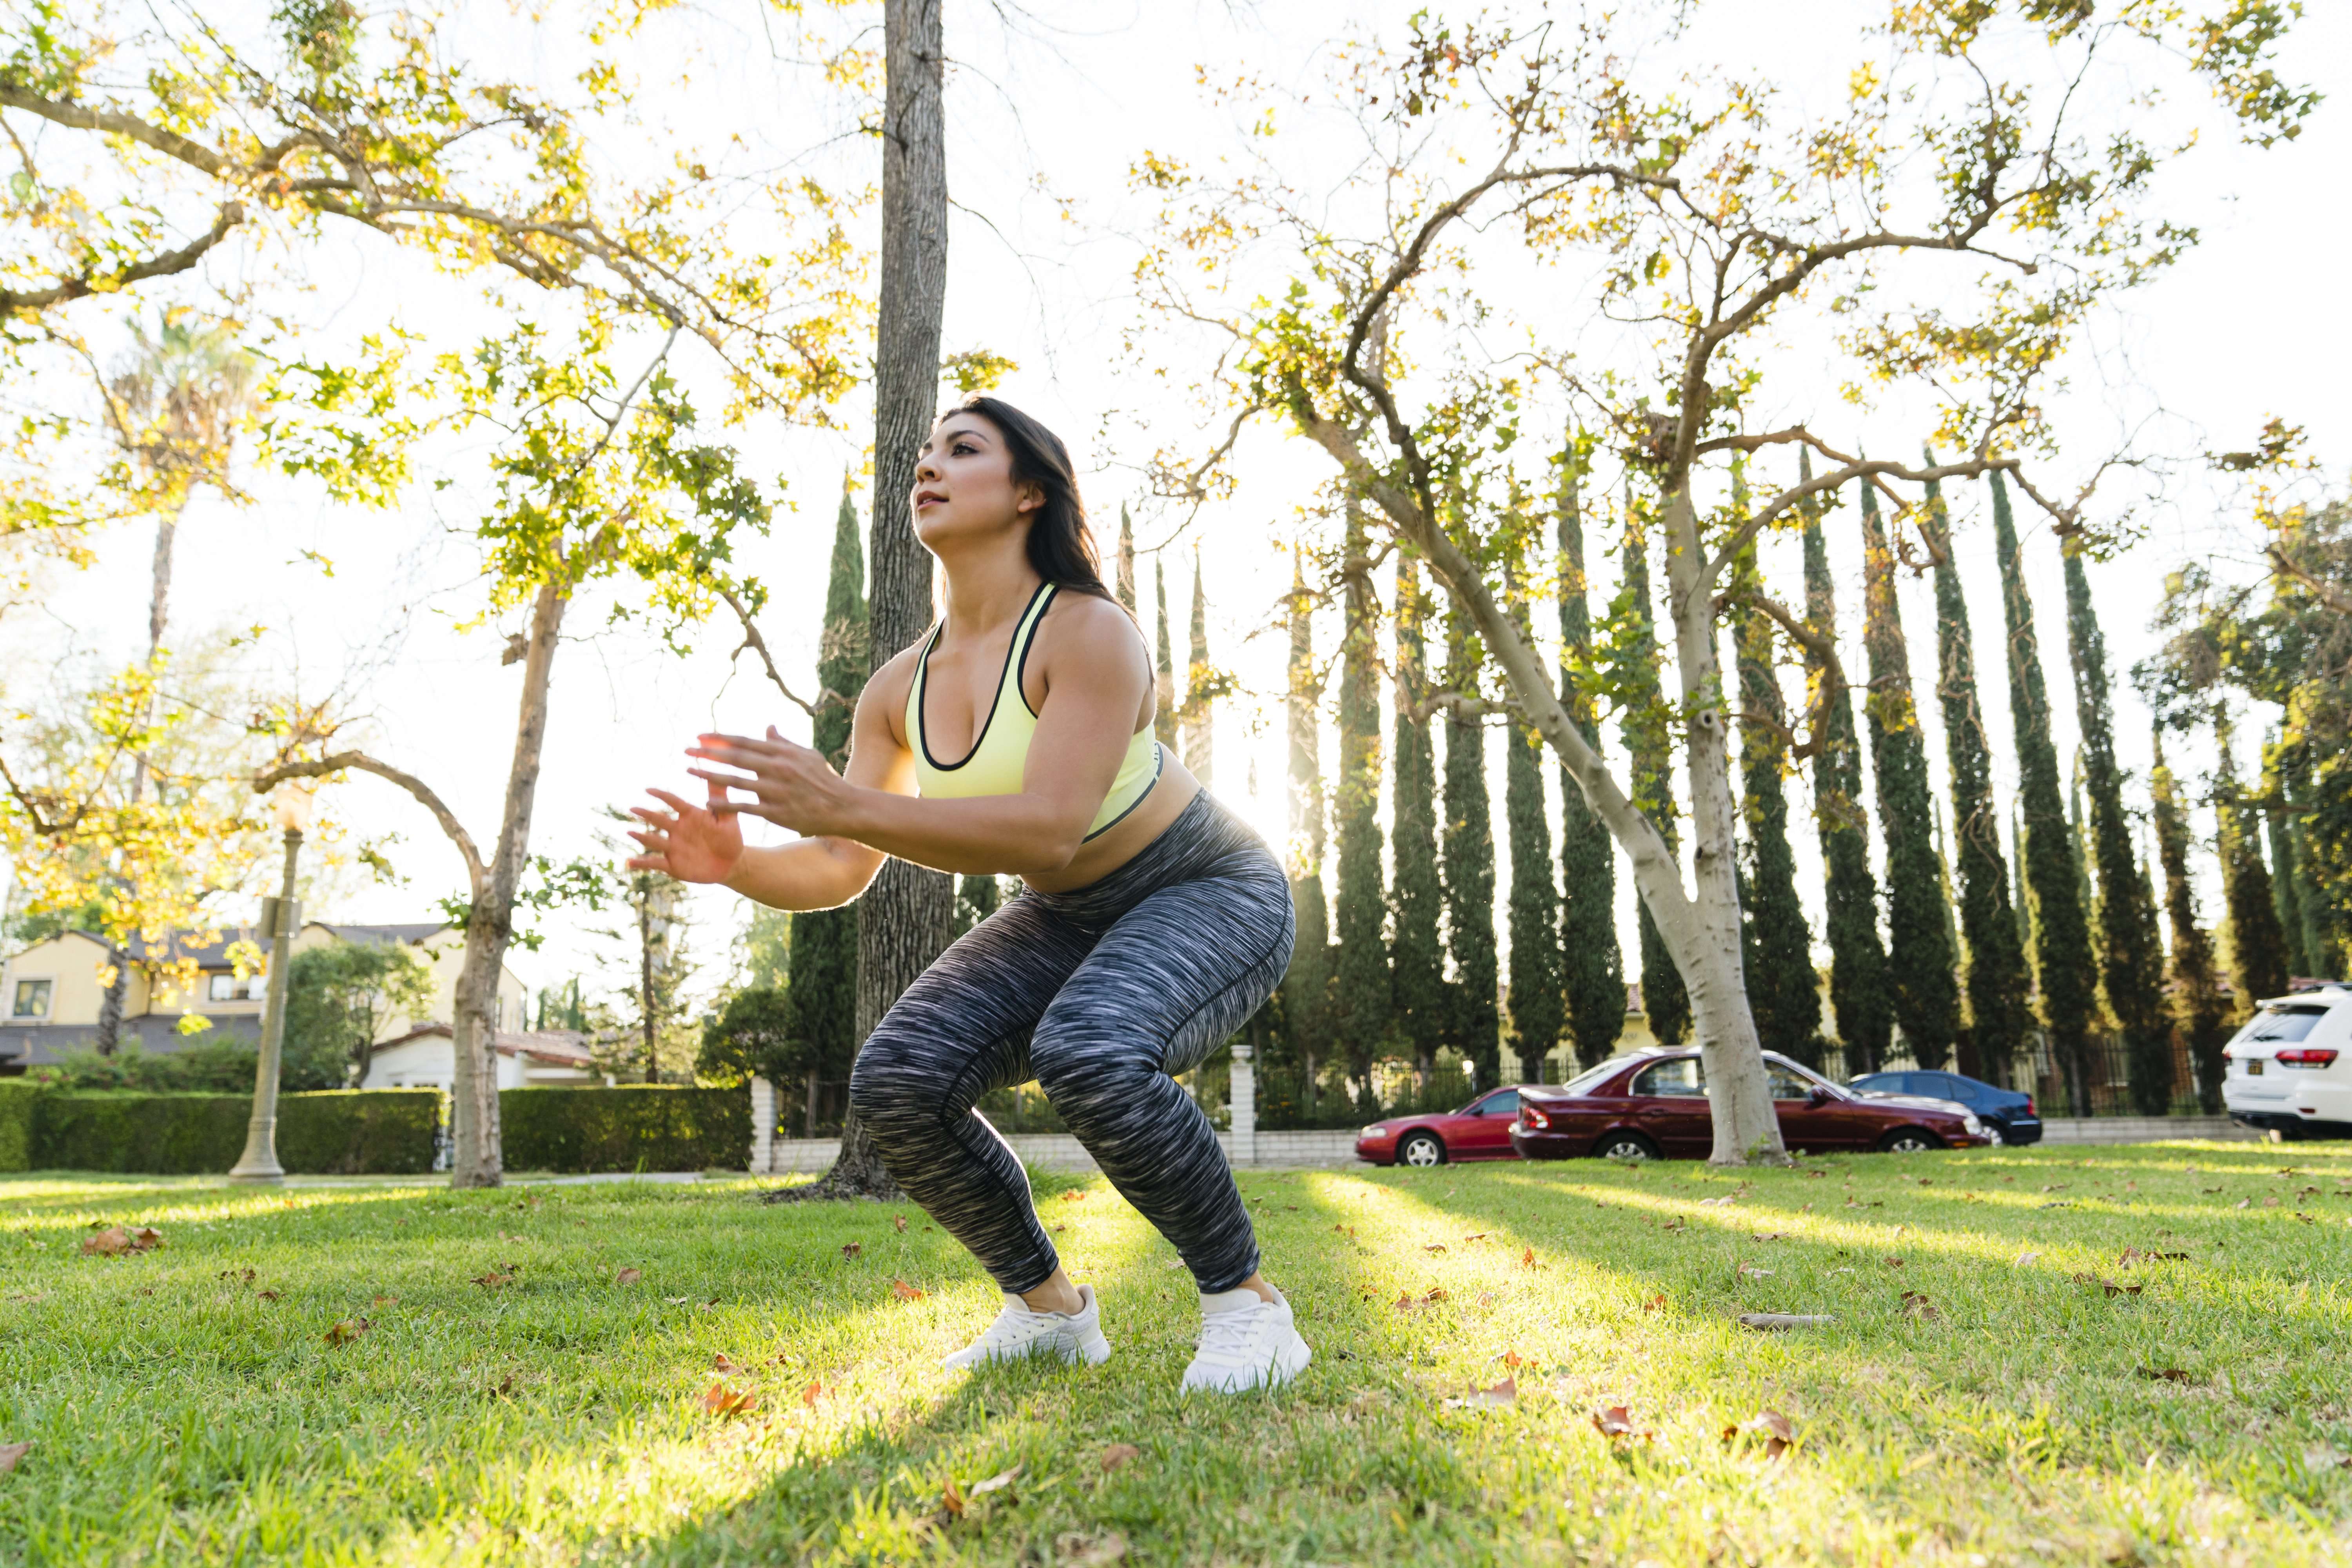 A person is doing a squat exercise outdoors, wearing athletic attire